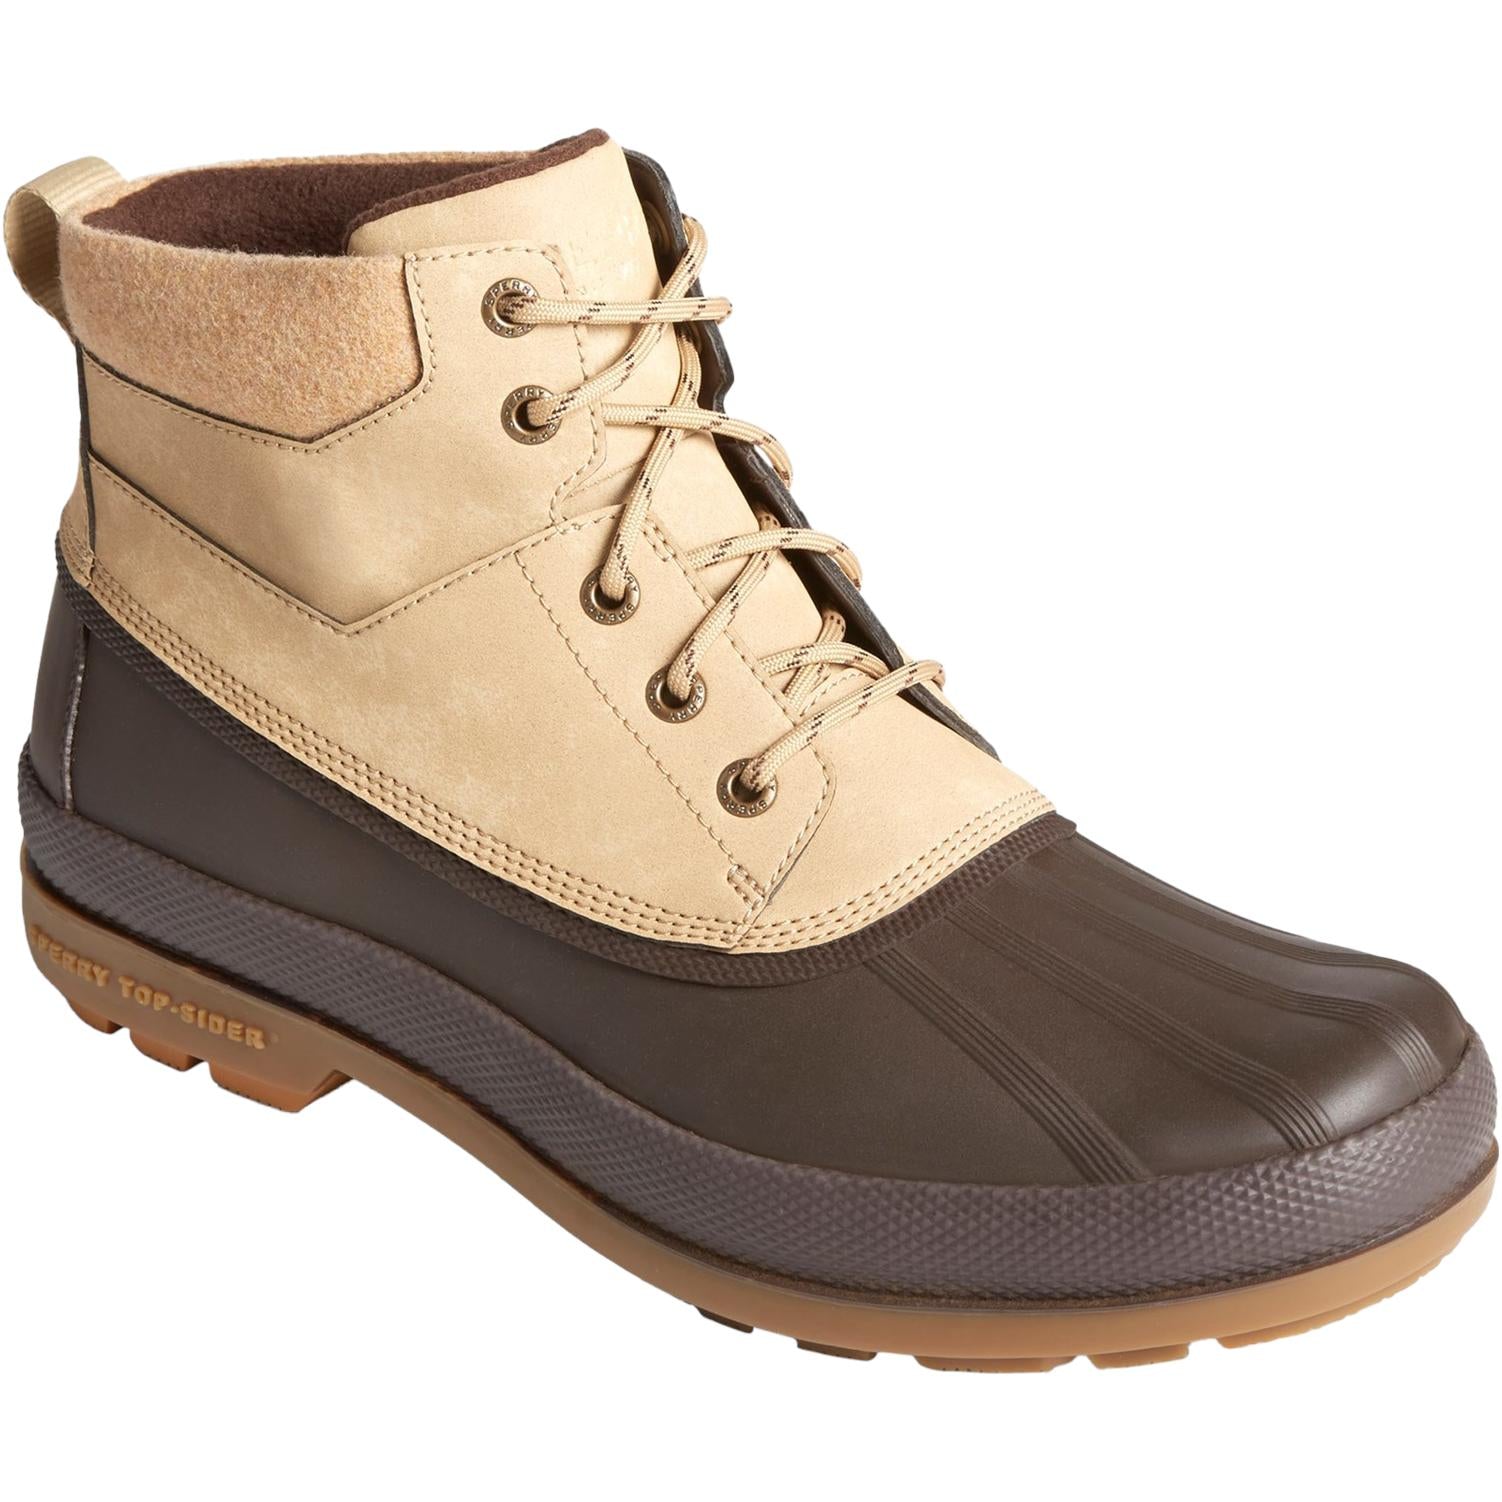 Sperry Top-sider Cold Bay Chukka Boots